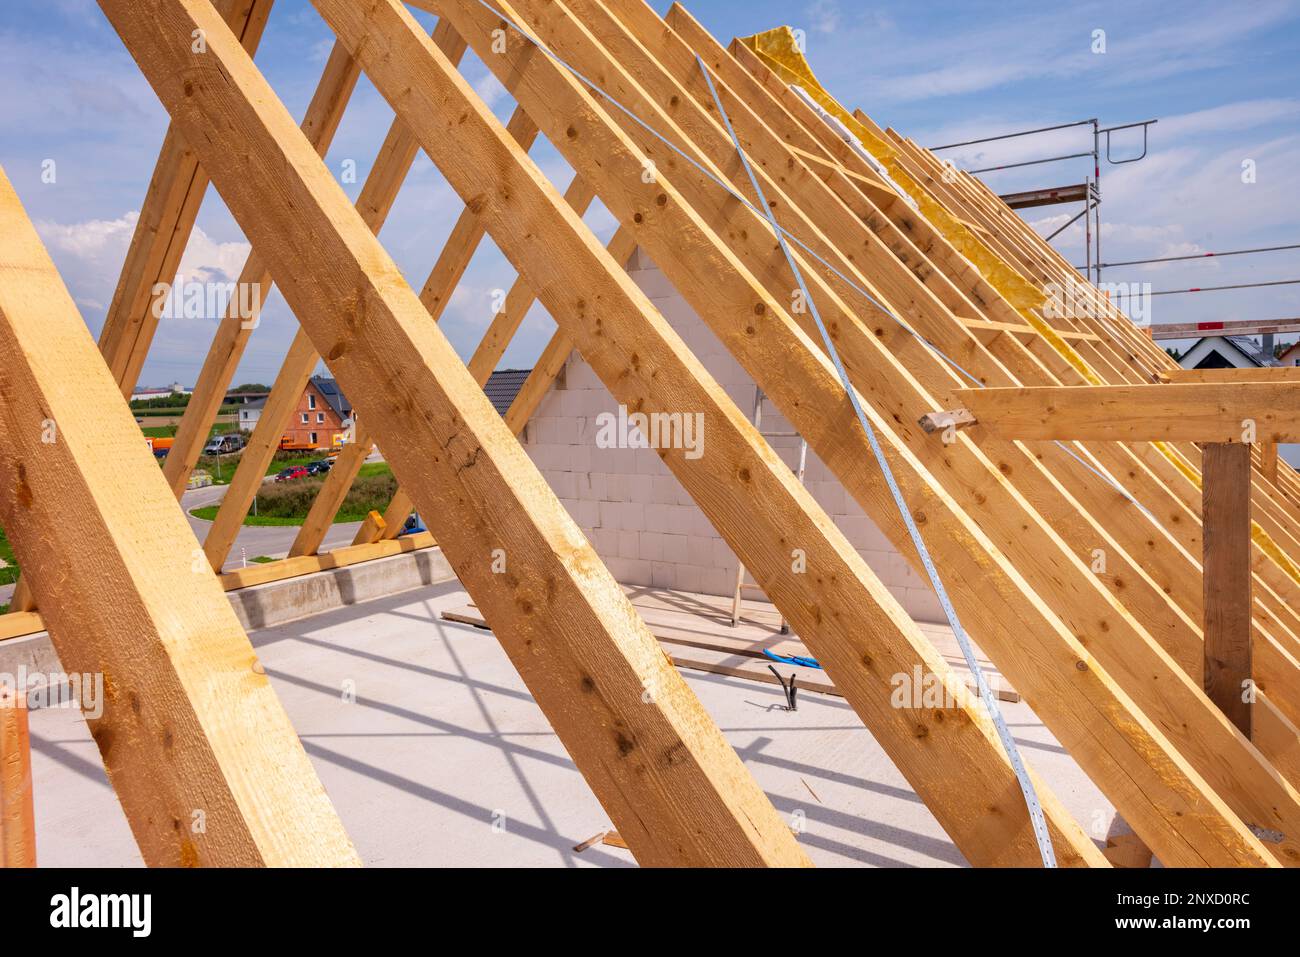 Roof truss in construction of a newly built house Stock Photo